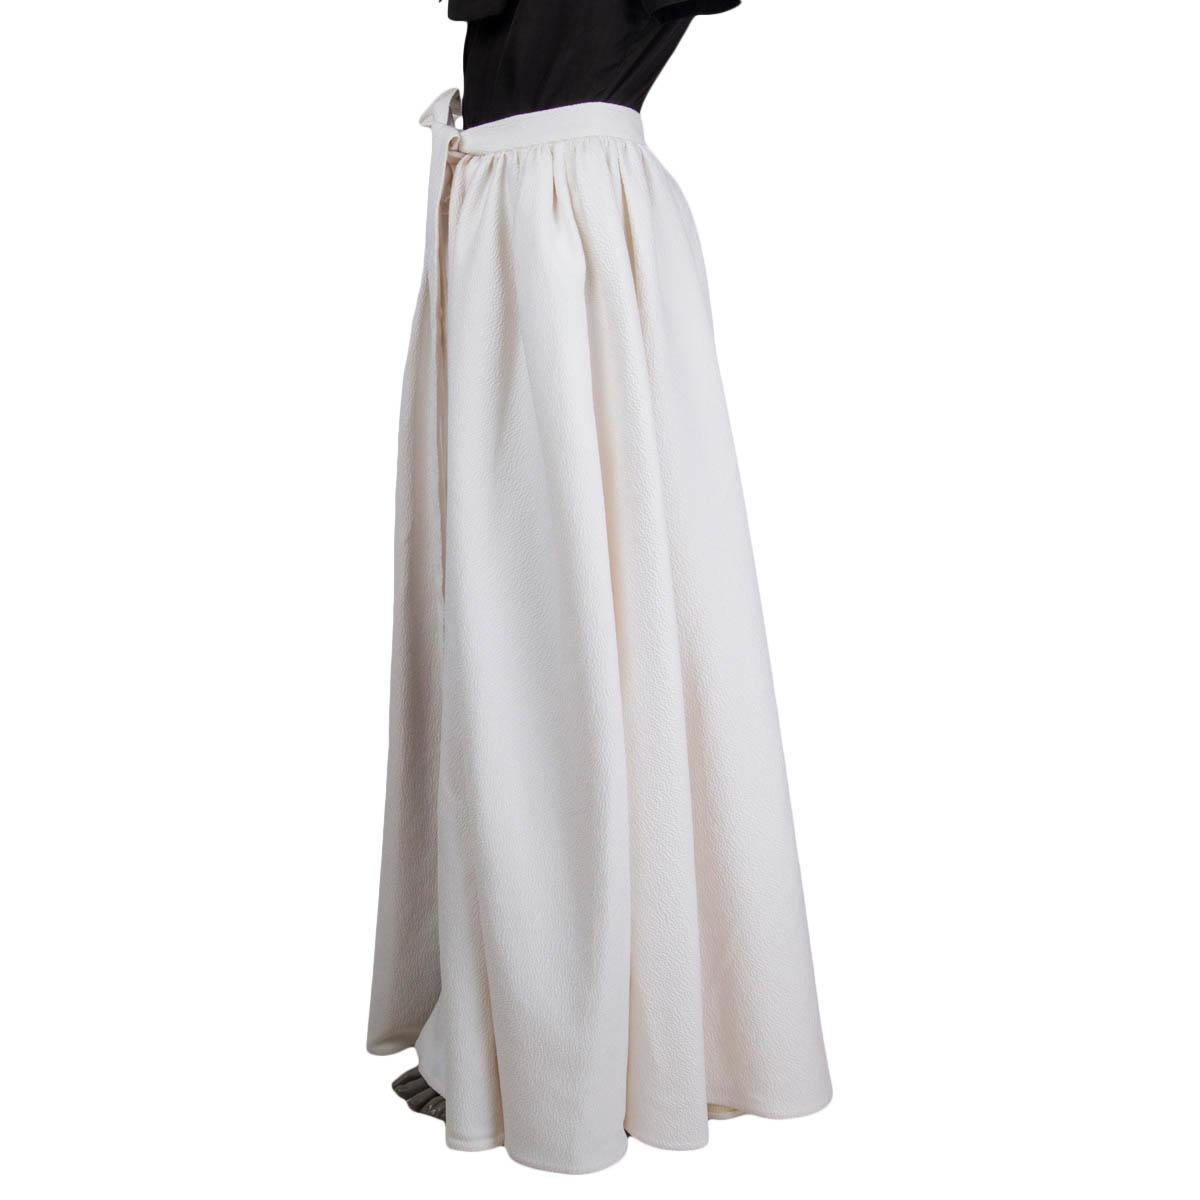 100% authentic Emilia Wickstead 'Sorrento' cloque wrap skirt in off white polyester (73%), polyamid (17%), silk (8%) and elastane (2%). Features an open front and ties at the waist. Fully lined in off-white silk (100%). Brand new, with